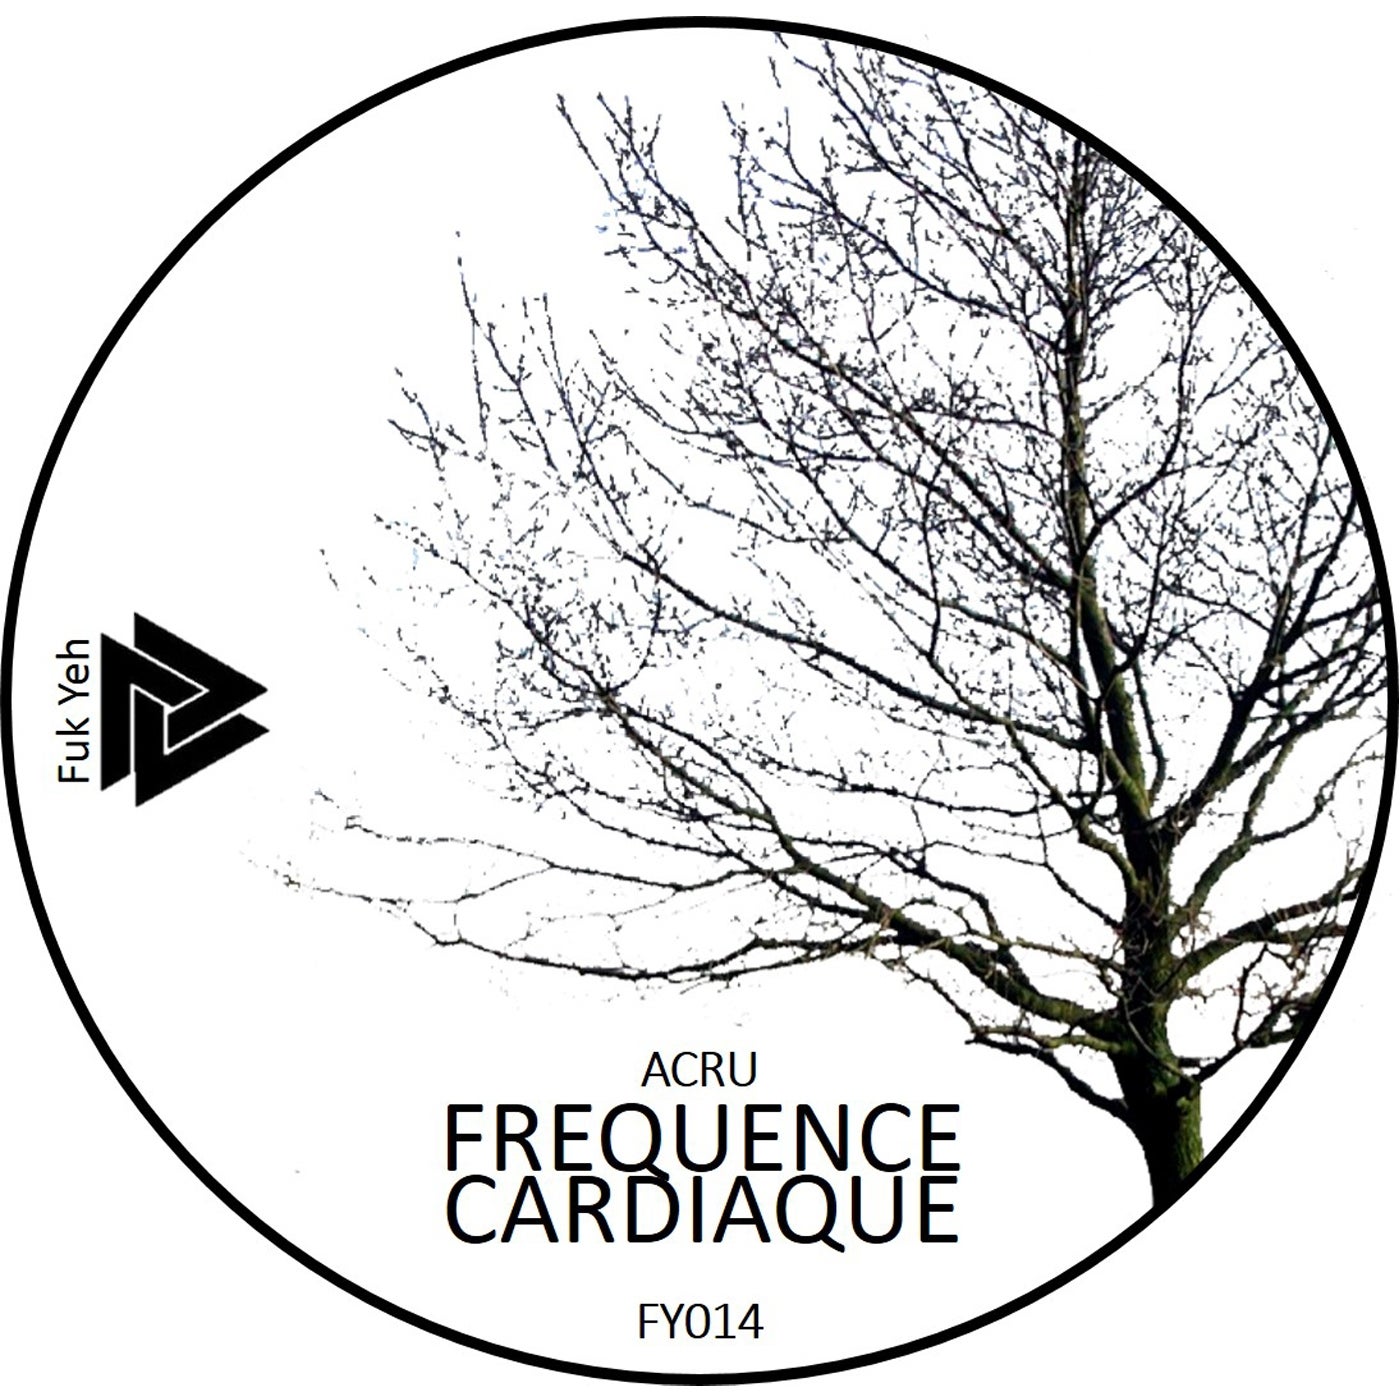 Frequence cardiaque